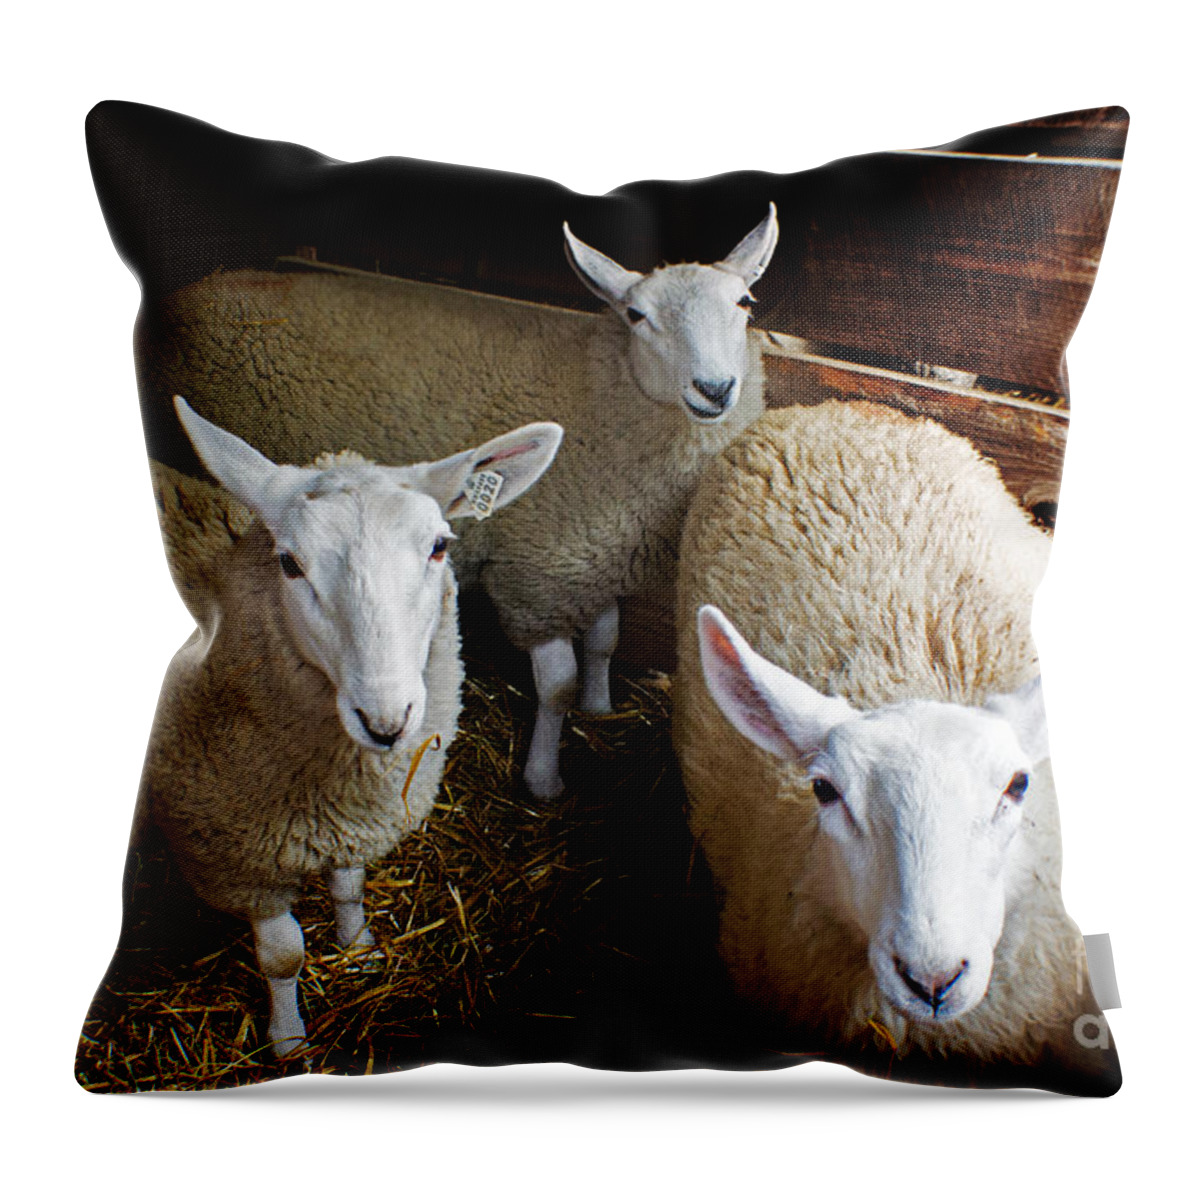 Sheep Throw Pillow featuring the photograph Curious Sheep by Kevin Fortier